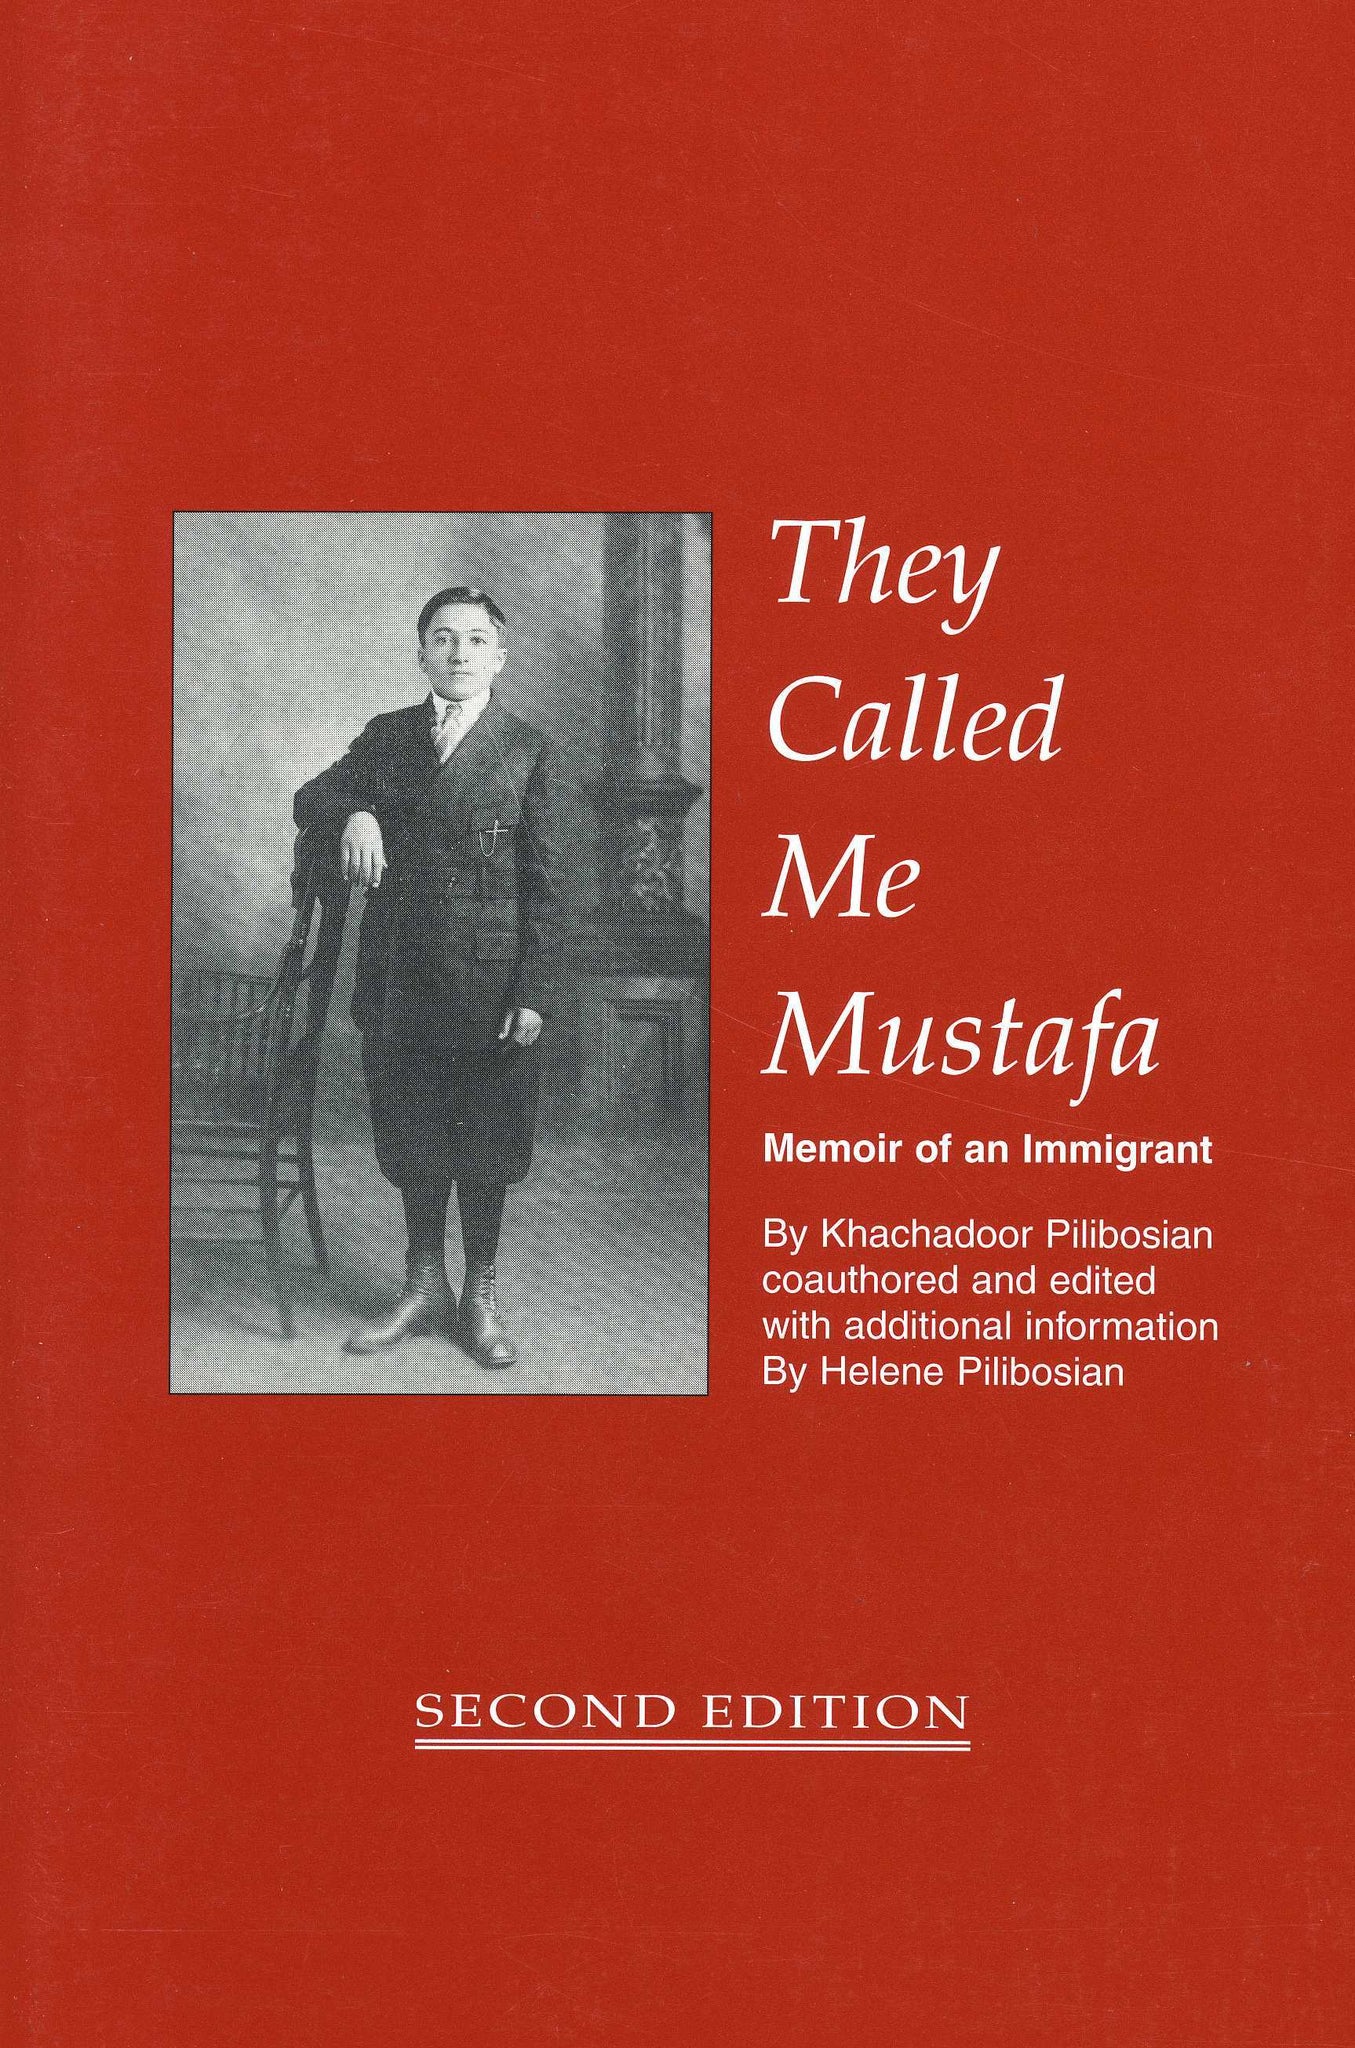 THEY CALLED ME MUSTAFA: Memoir of an Immigrant